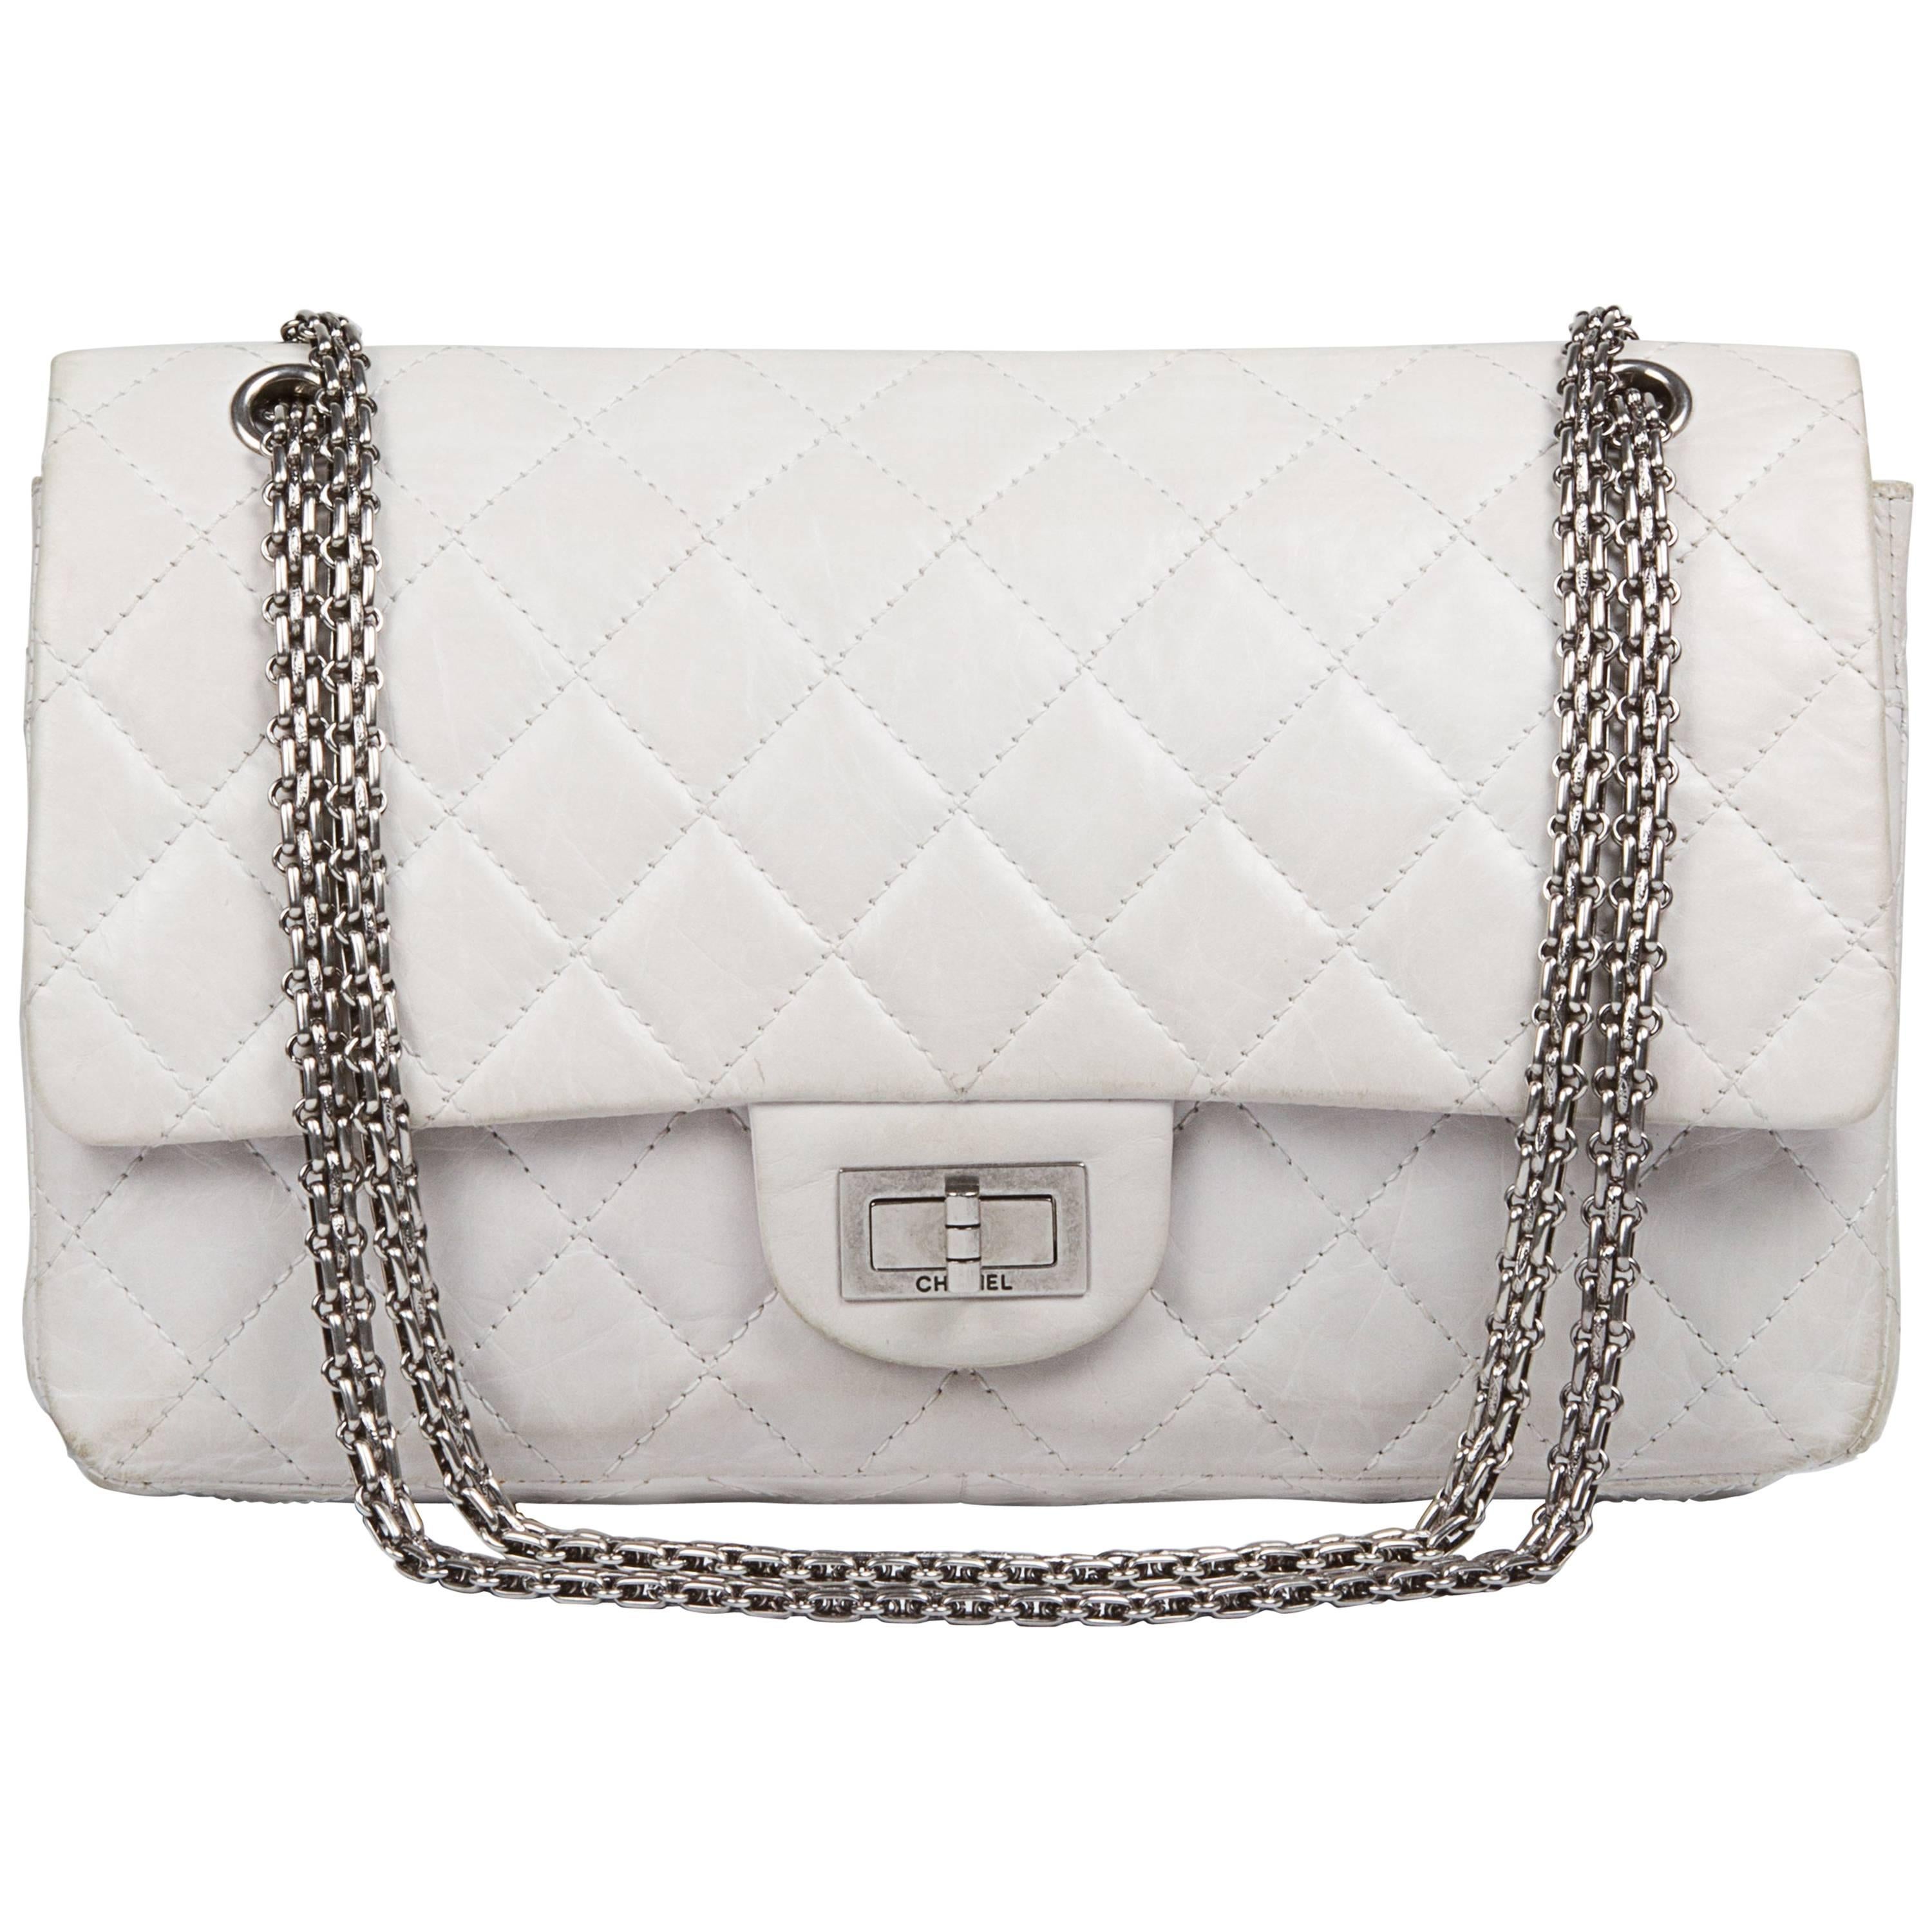 Chanel Reissue 227  White Leather Very Good Condition  For Sale